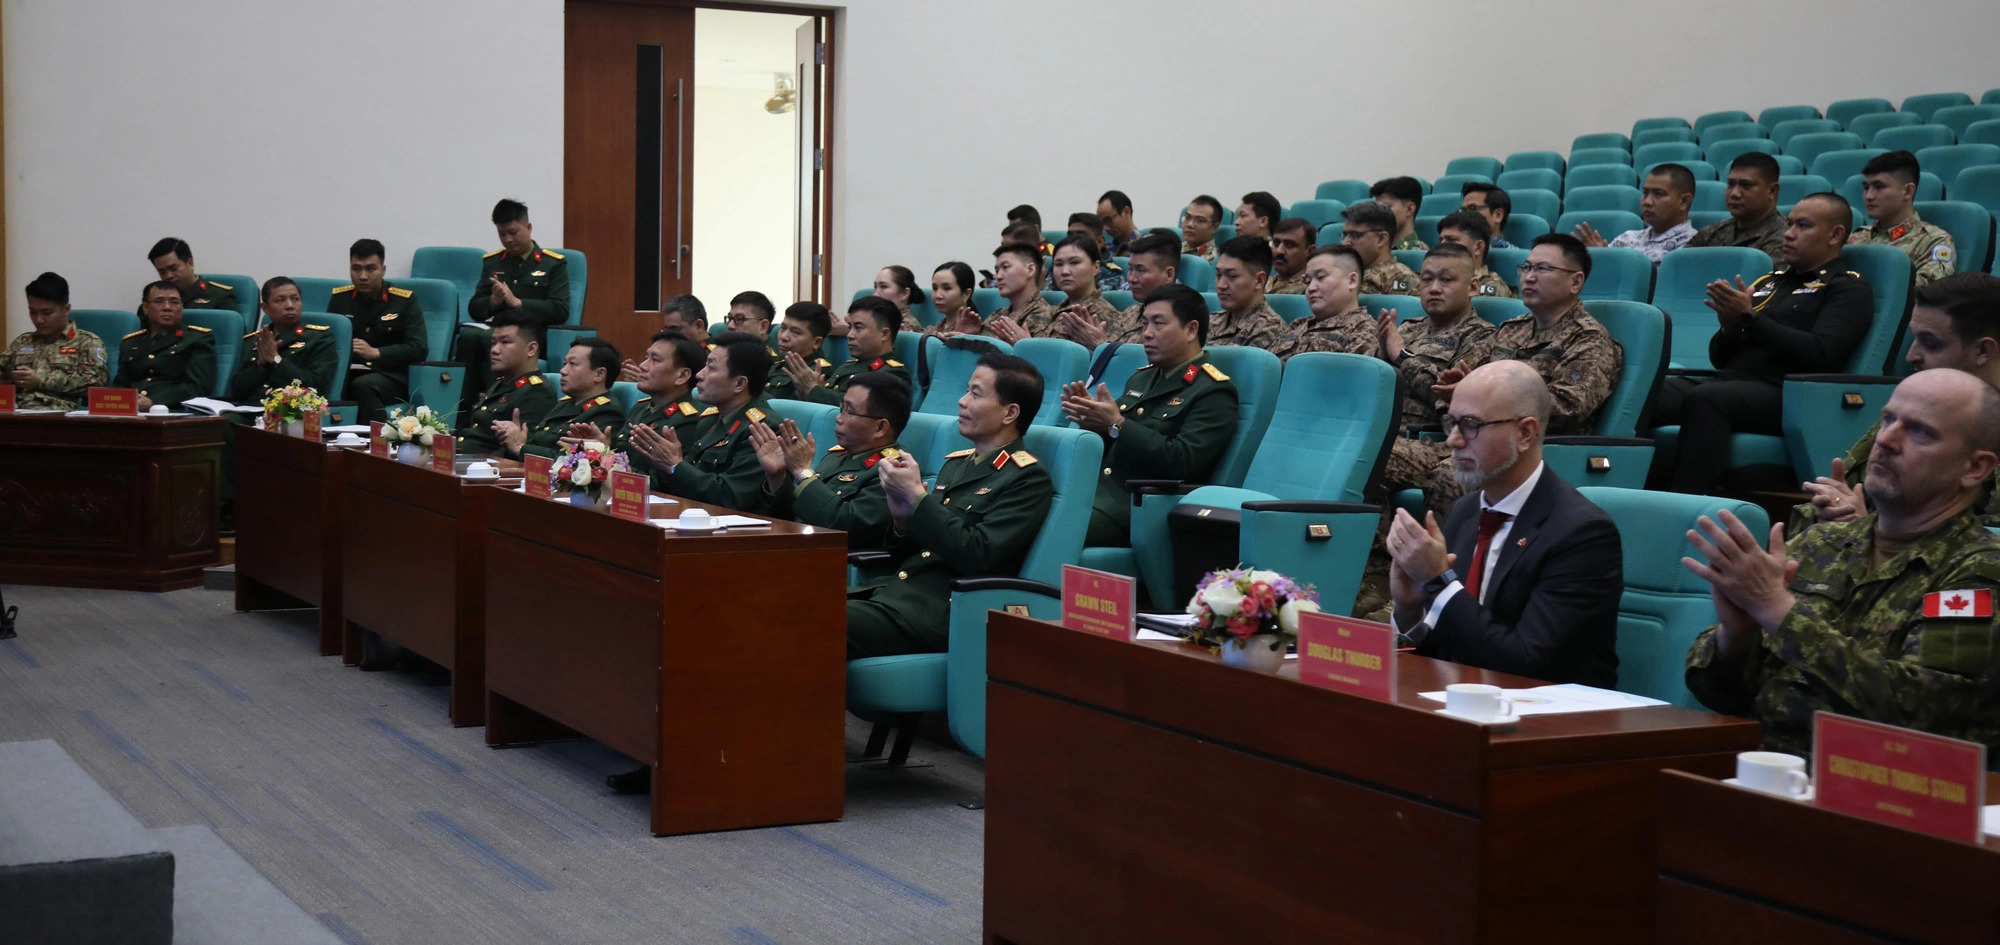 Vietnam, Canada commence UN staff officer course in Hanoi